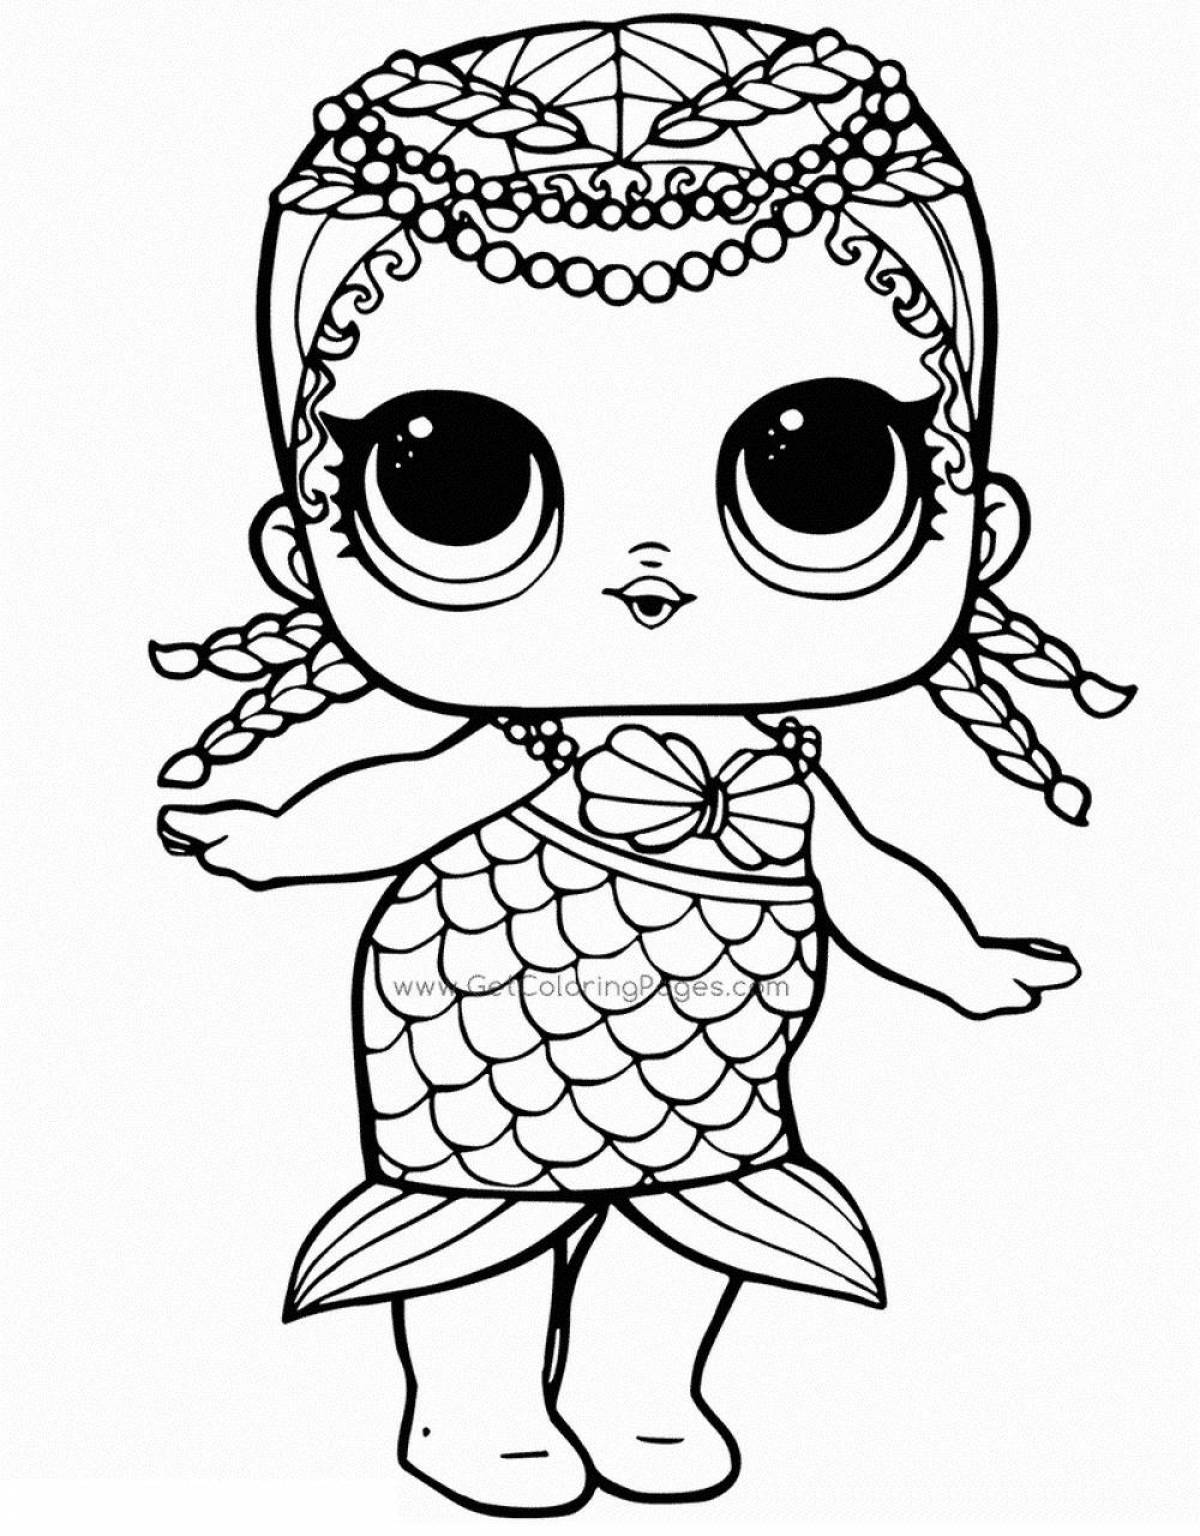 Lol dolls fashion coloring pages